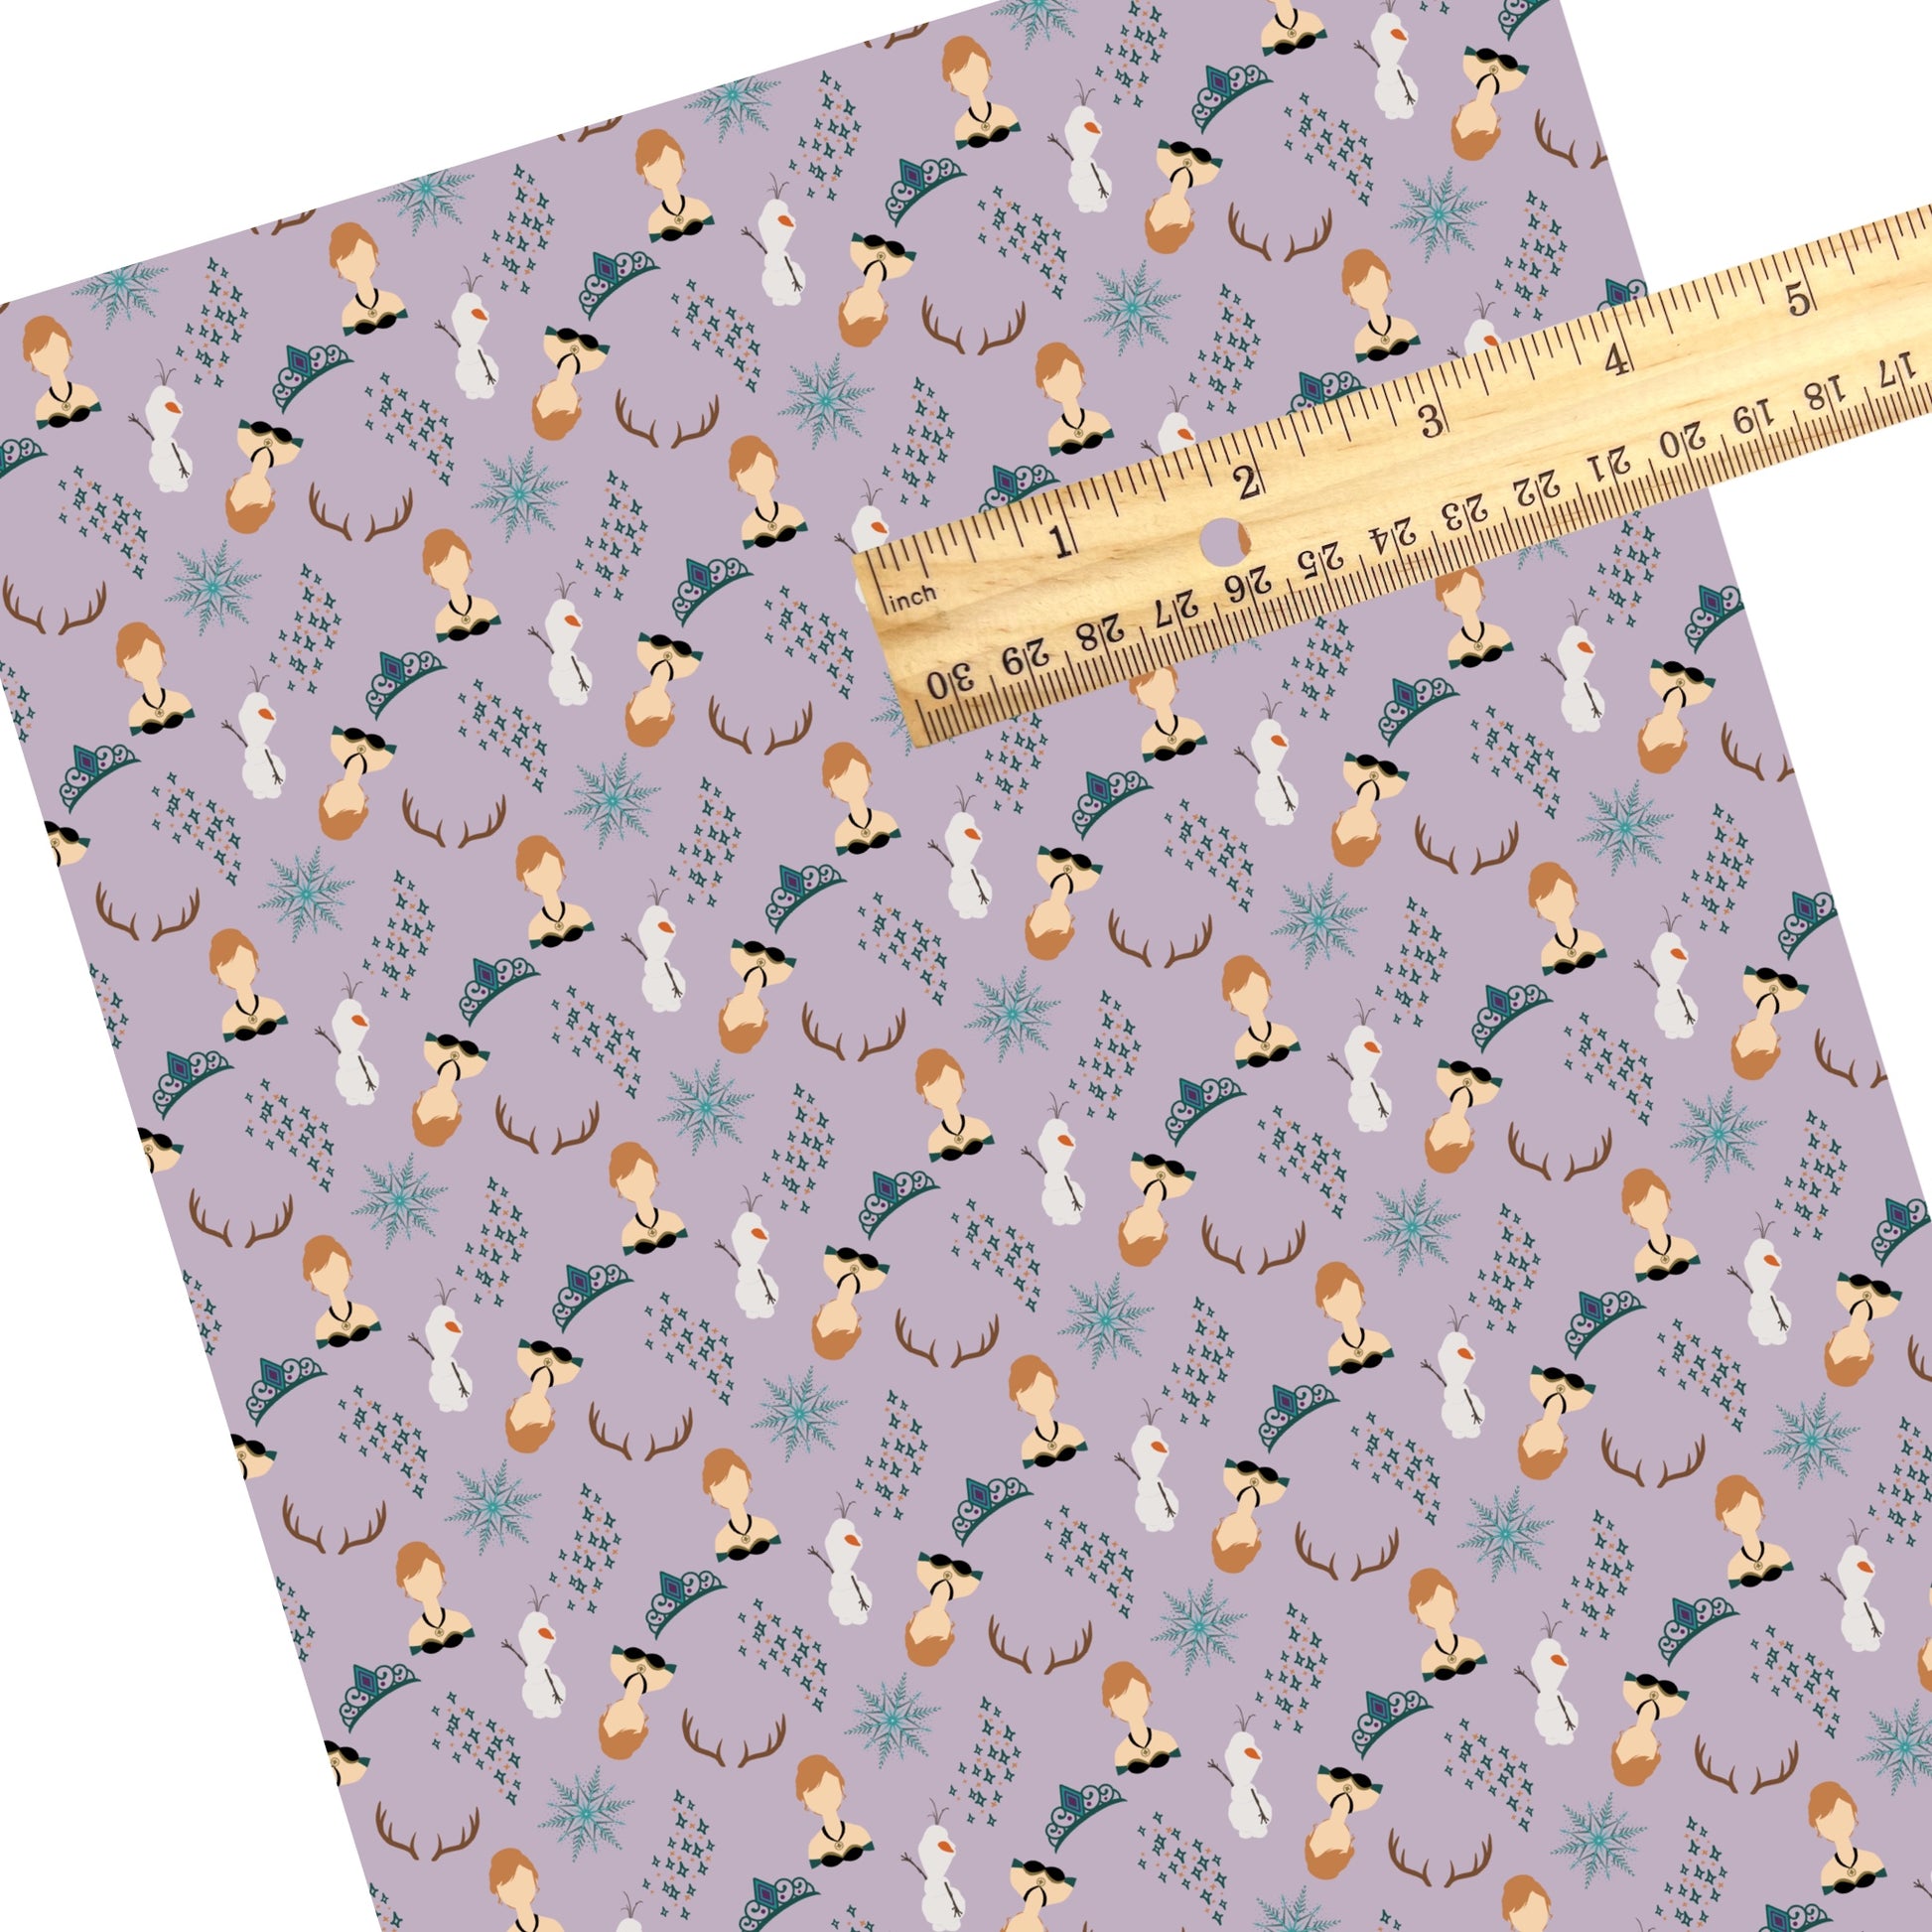 This winter movie themed inspired faux leather sheets contain the following design: princess and snowman surrounded by antlers and crowns on light purple. Our CPSIA compliant faux leather sheets or rolls can be used for all types of crafting projects.